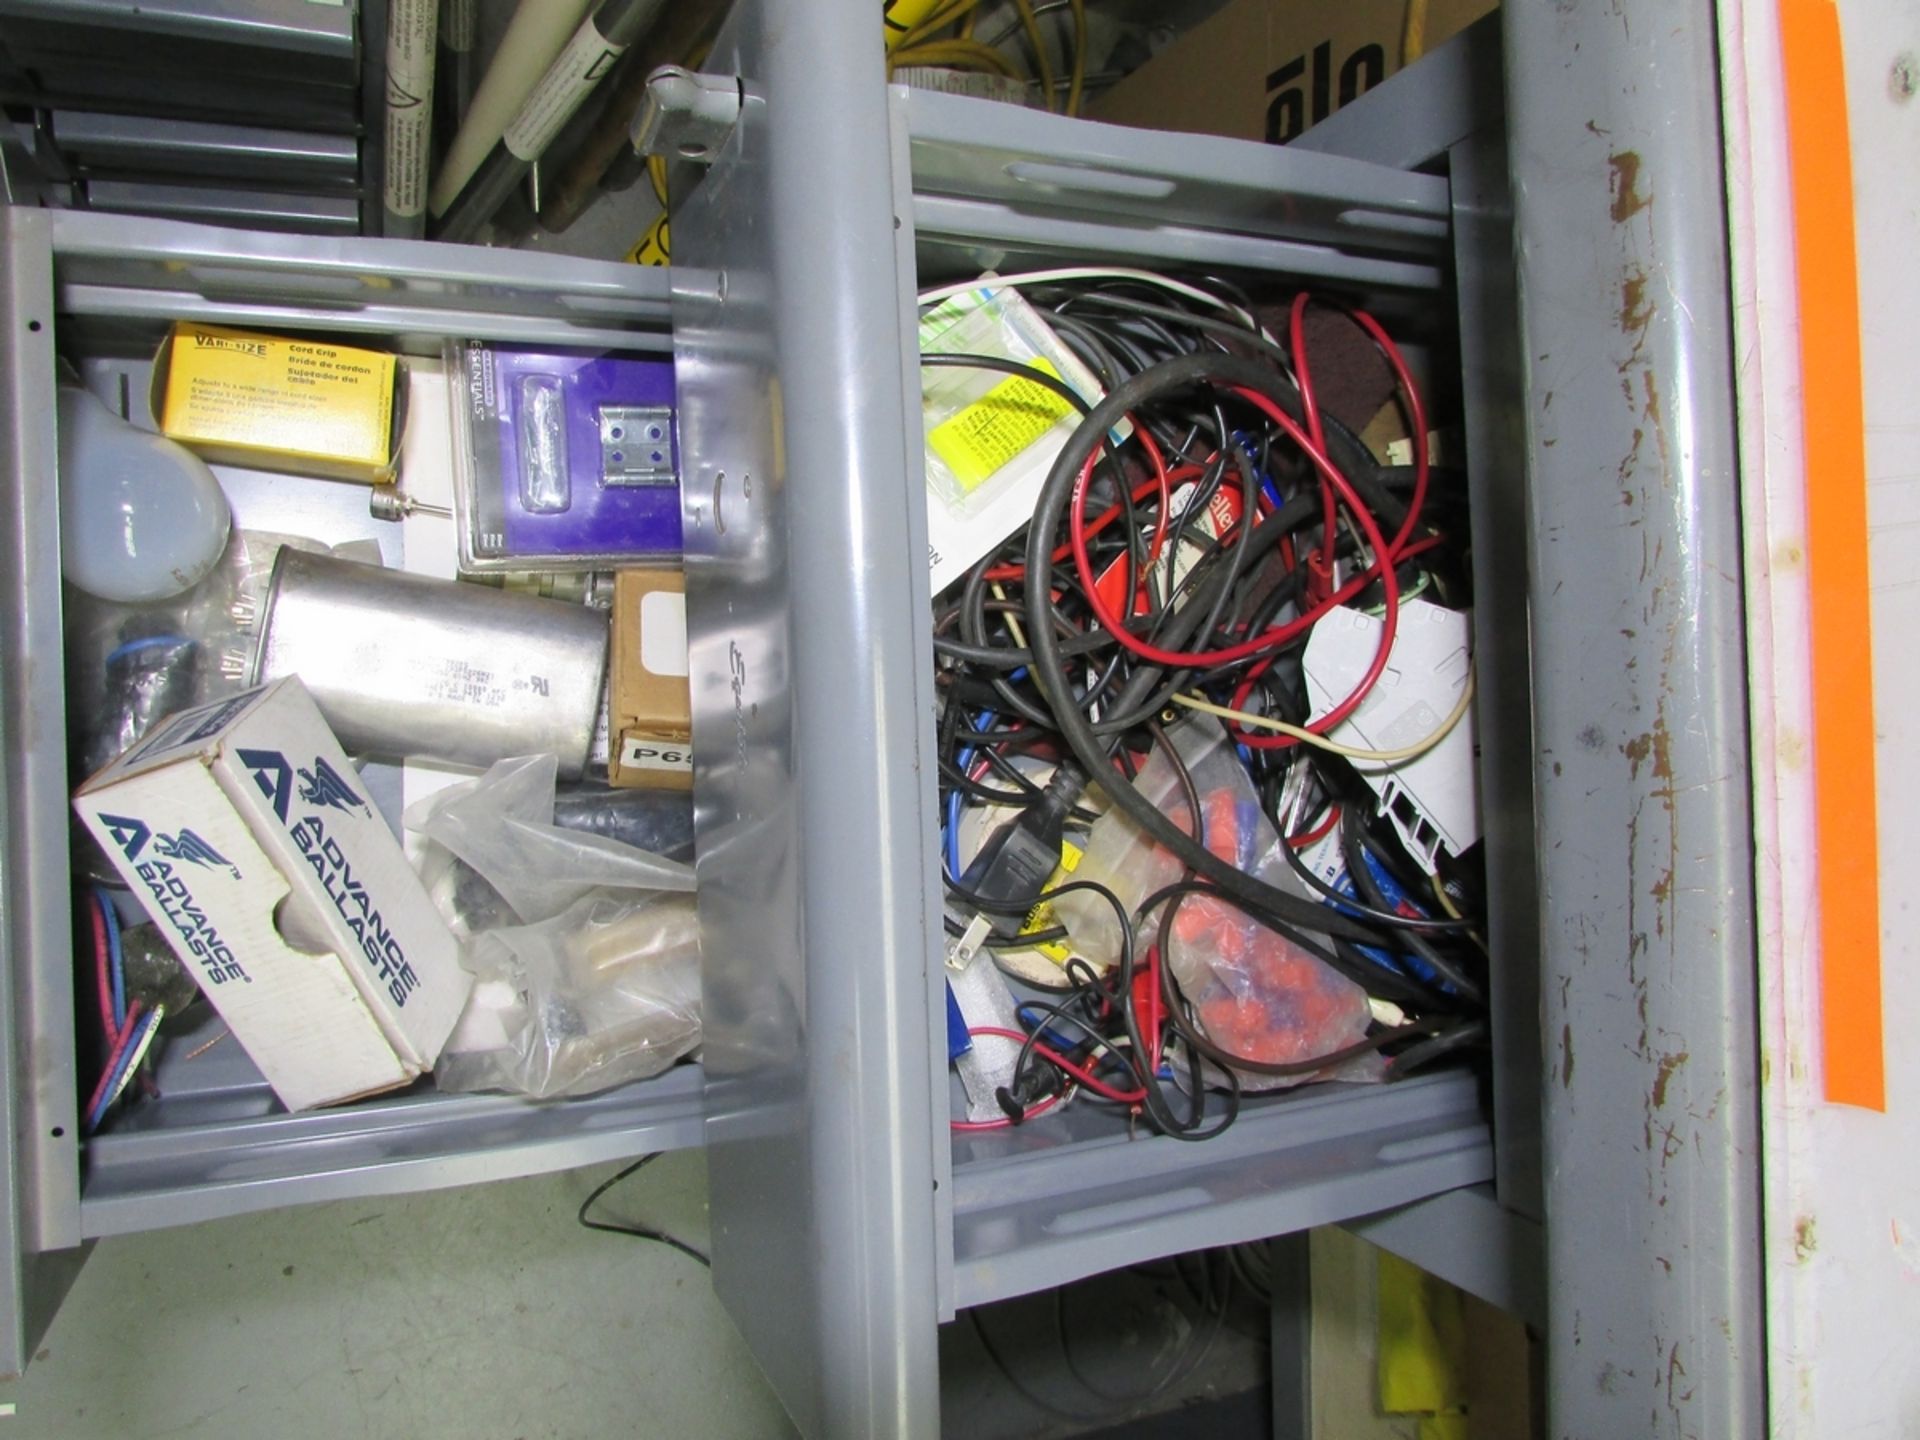 Steel Electricians Workbench - Image 3 of 3